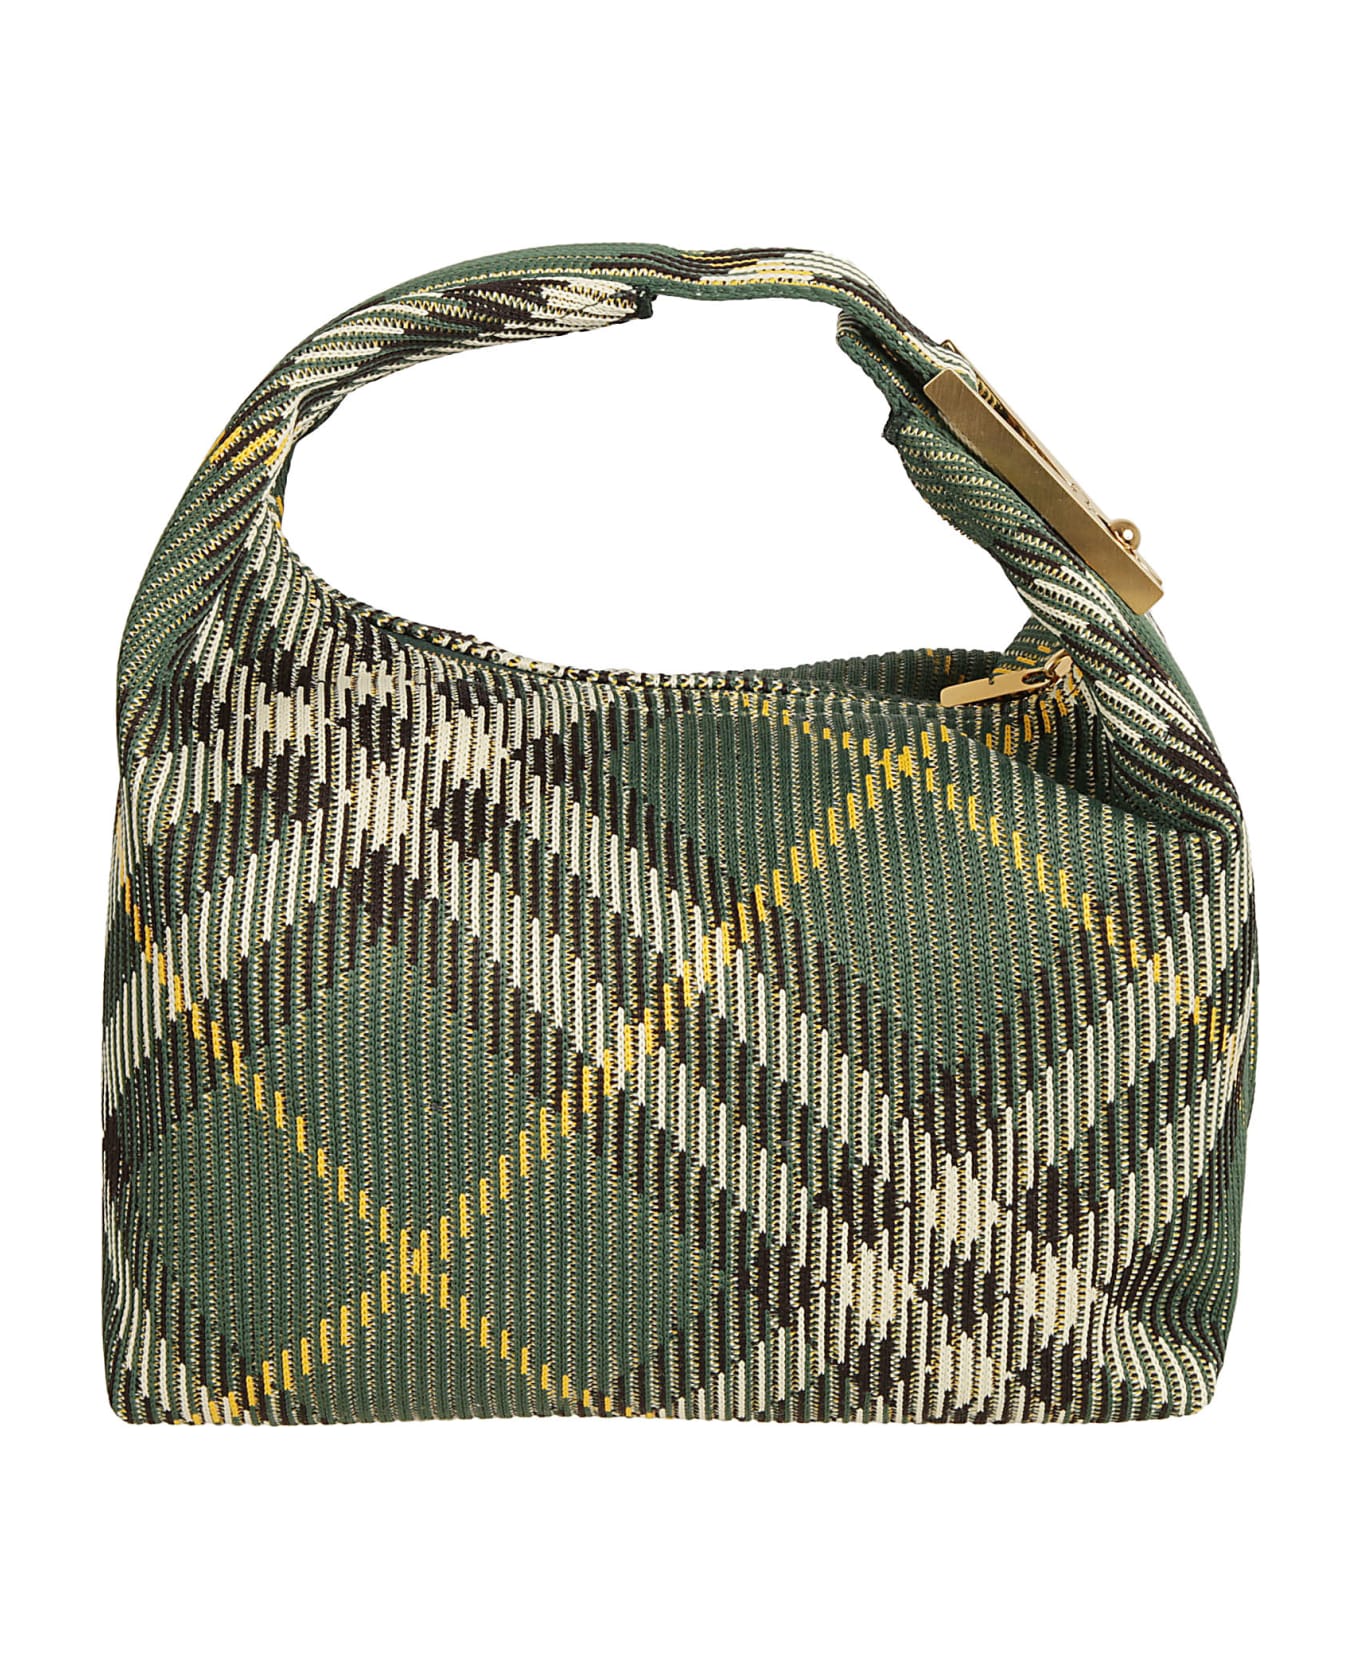 Burberry Check Patterned Hand Bag - Ivy